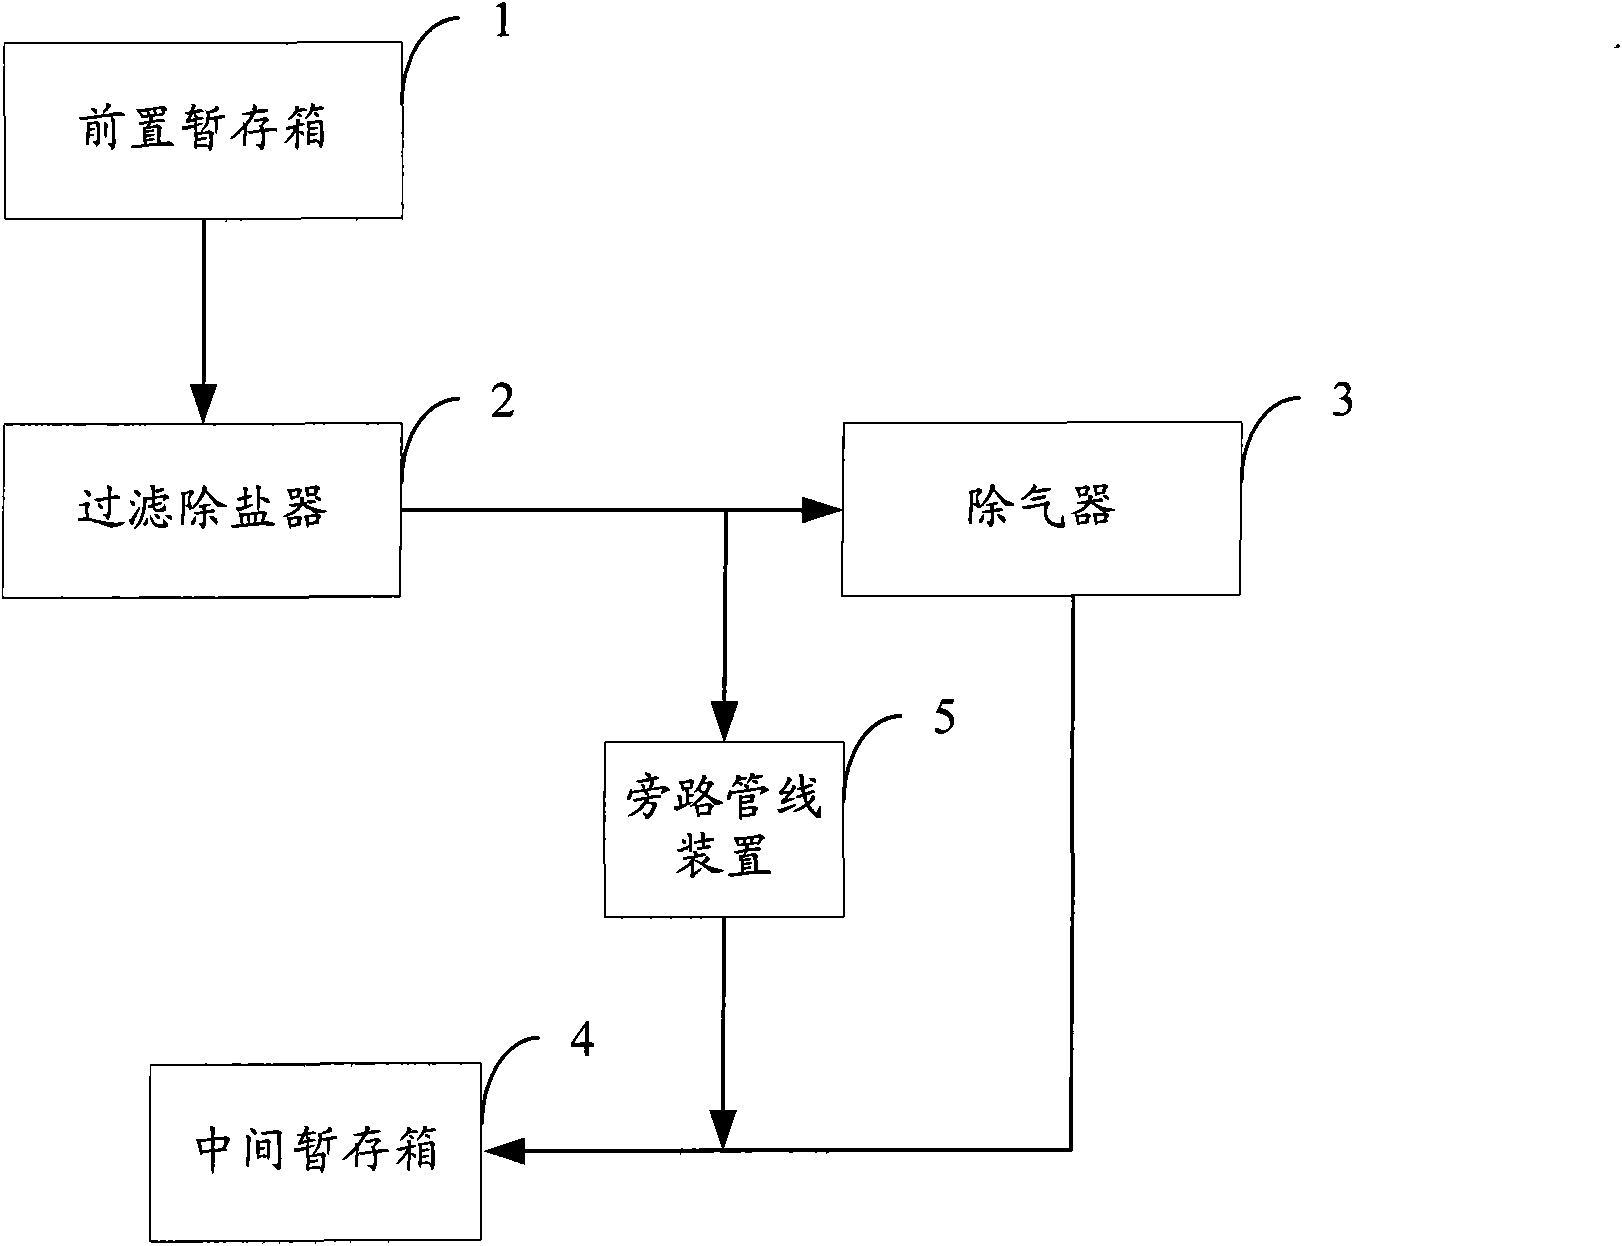 Boron recovery system of nuclear power plant